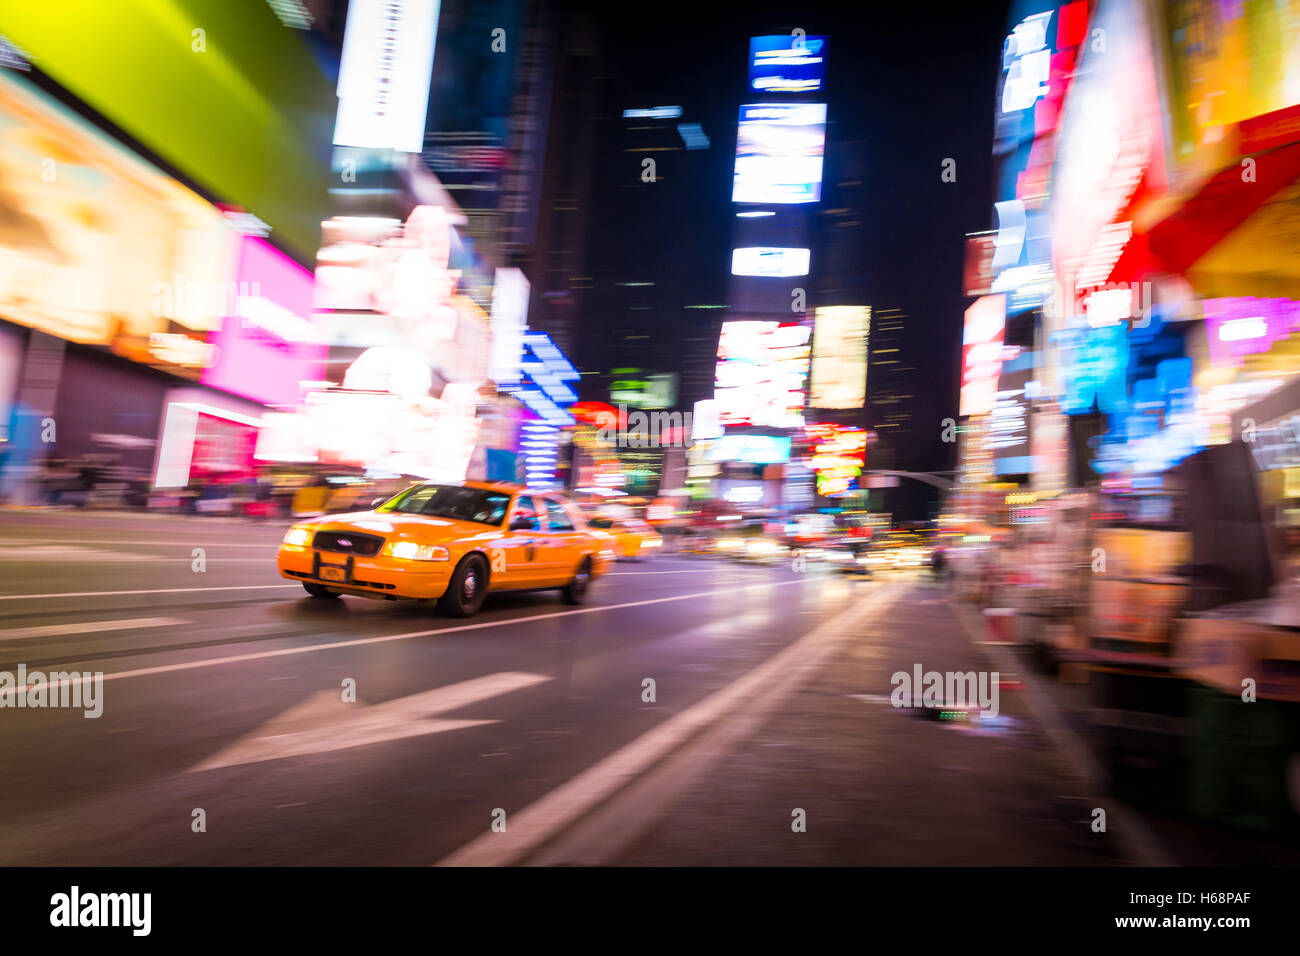 New York City NYC Taxi in motion in Times Square Stock Photo